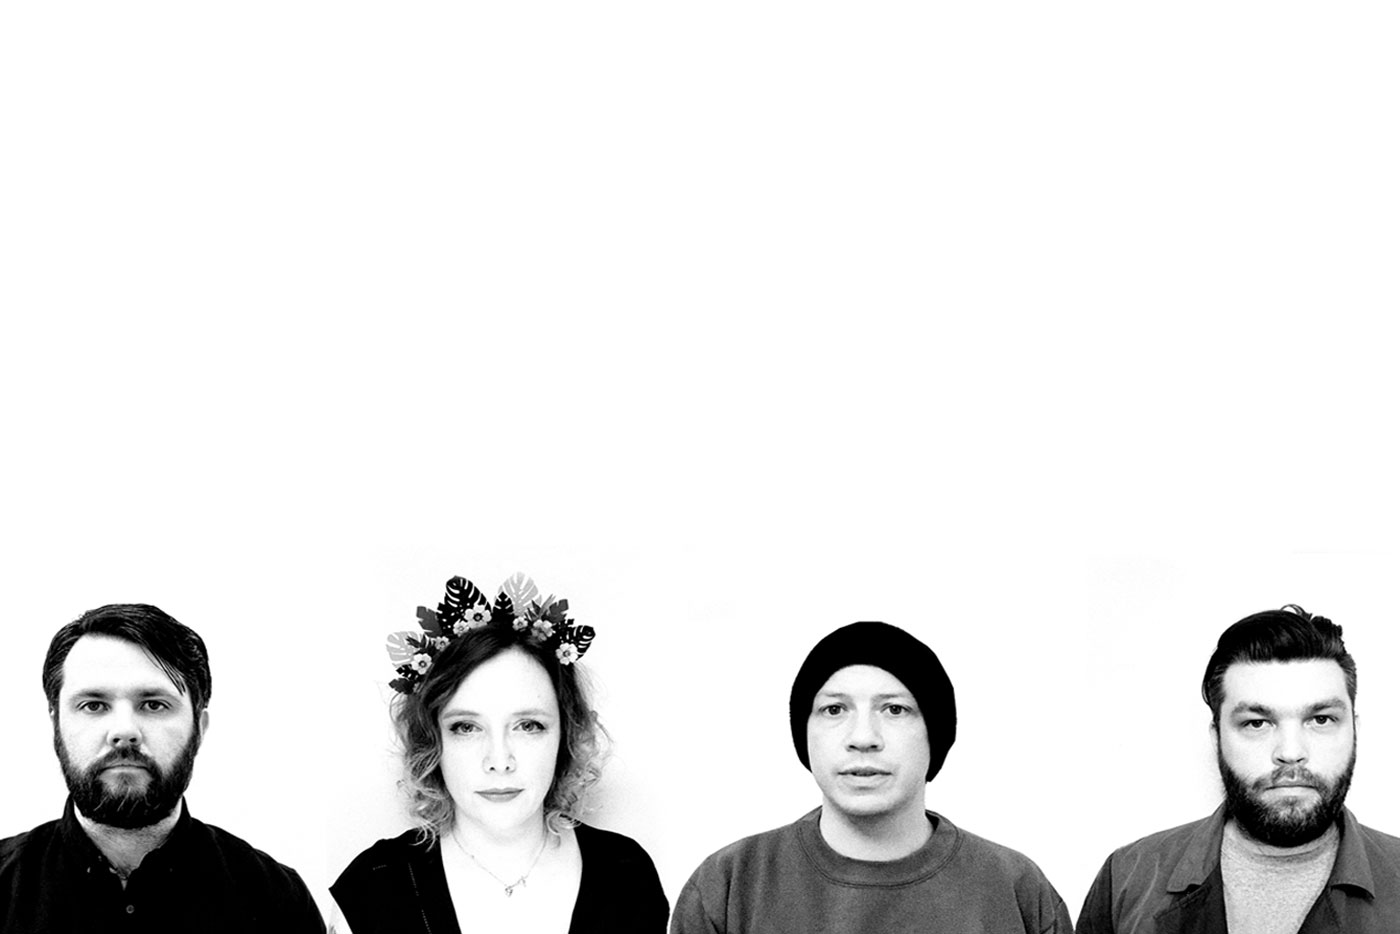 Minor Victories publican "Scattered Ashes"